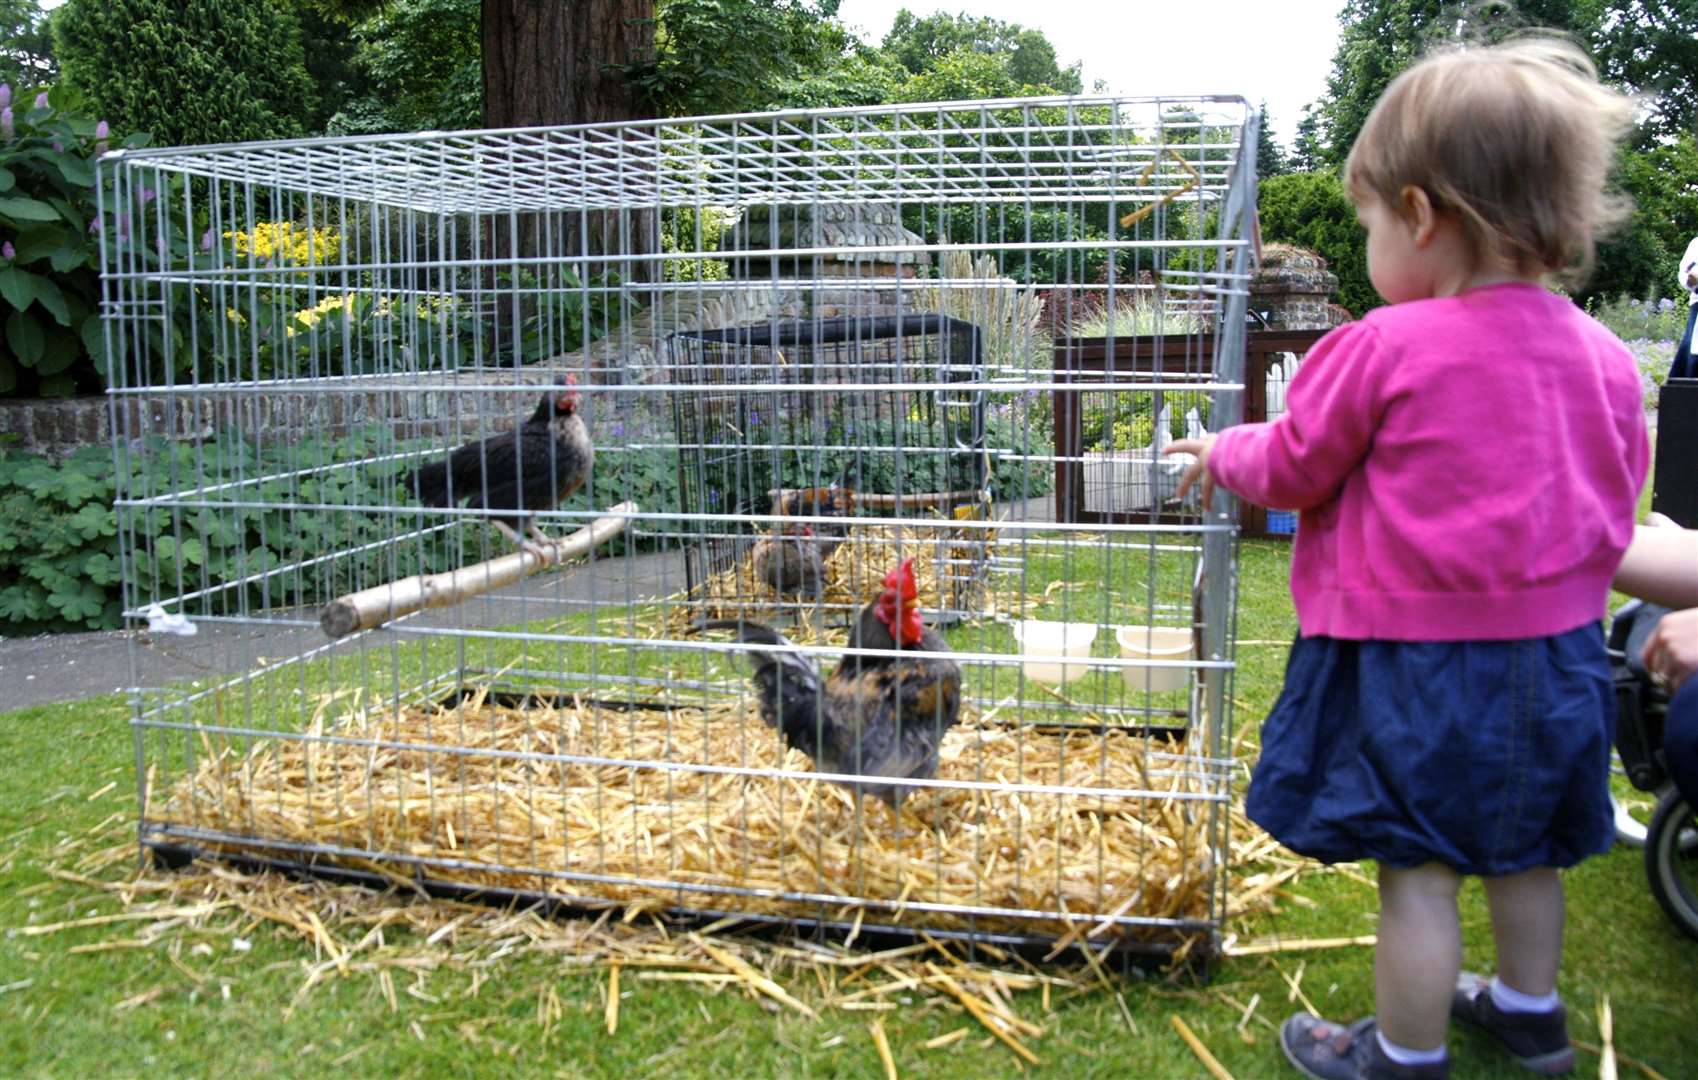 Like to see some hens this weekend? It's time to head to Great Comp Garden